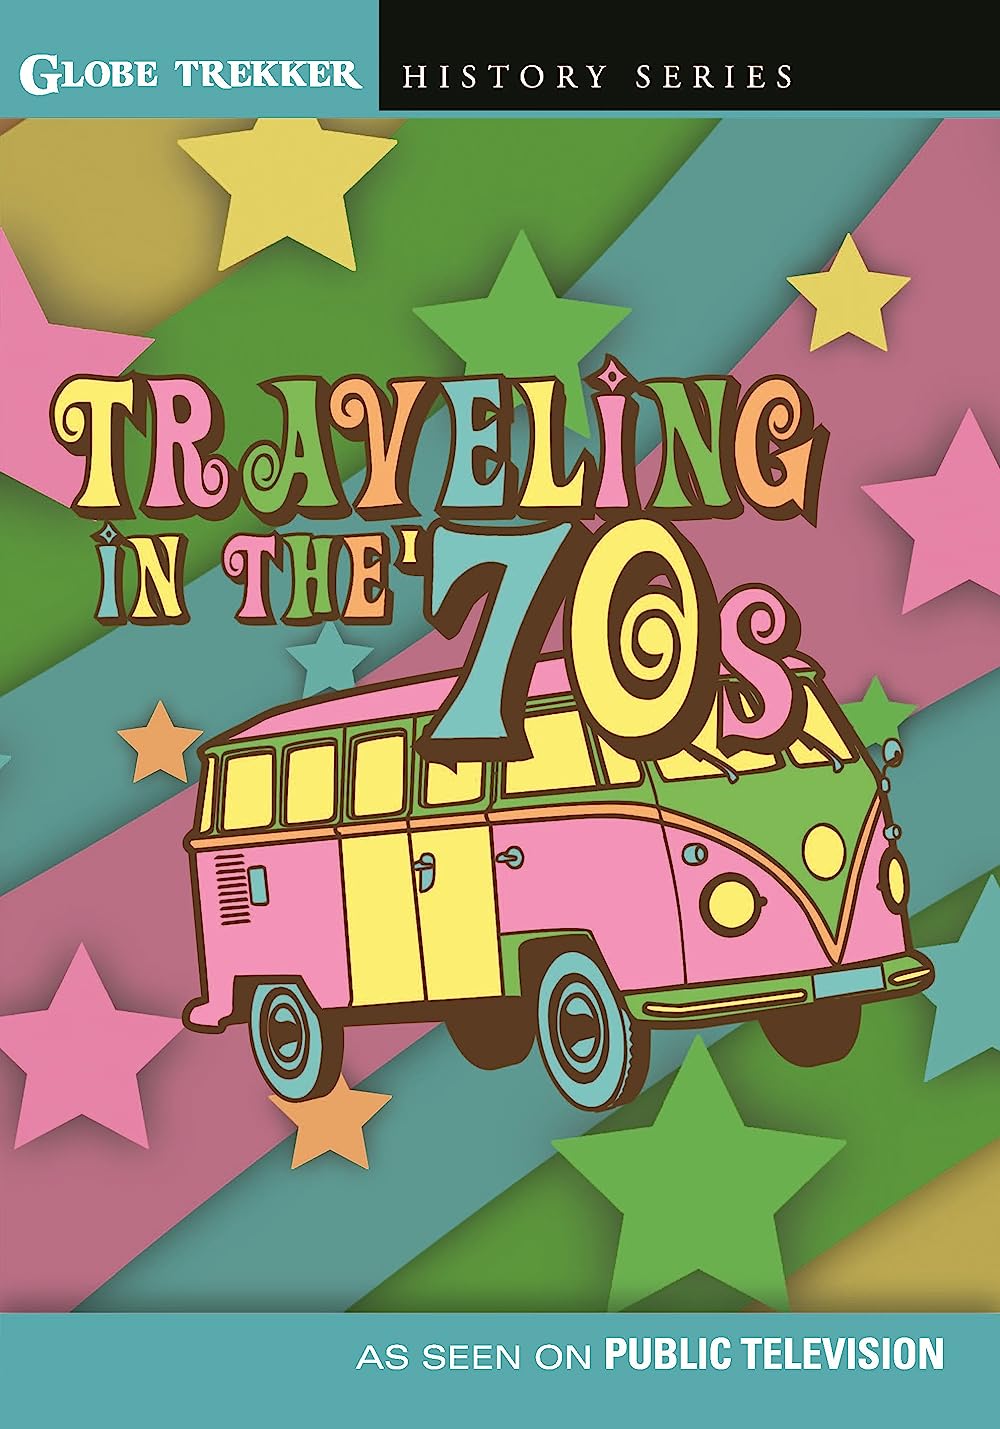 Traveling in the 70's